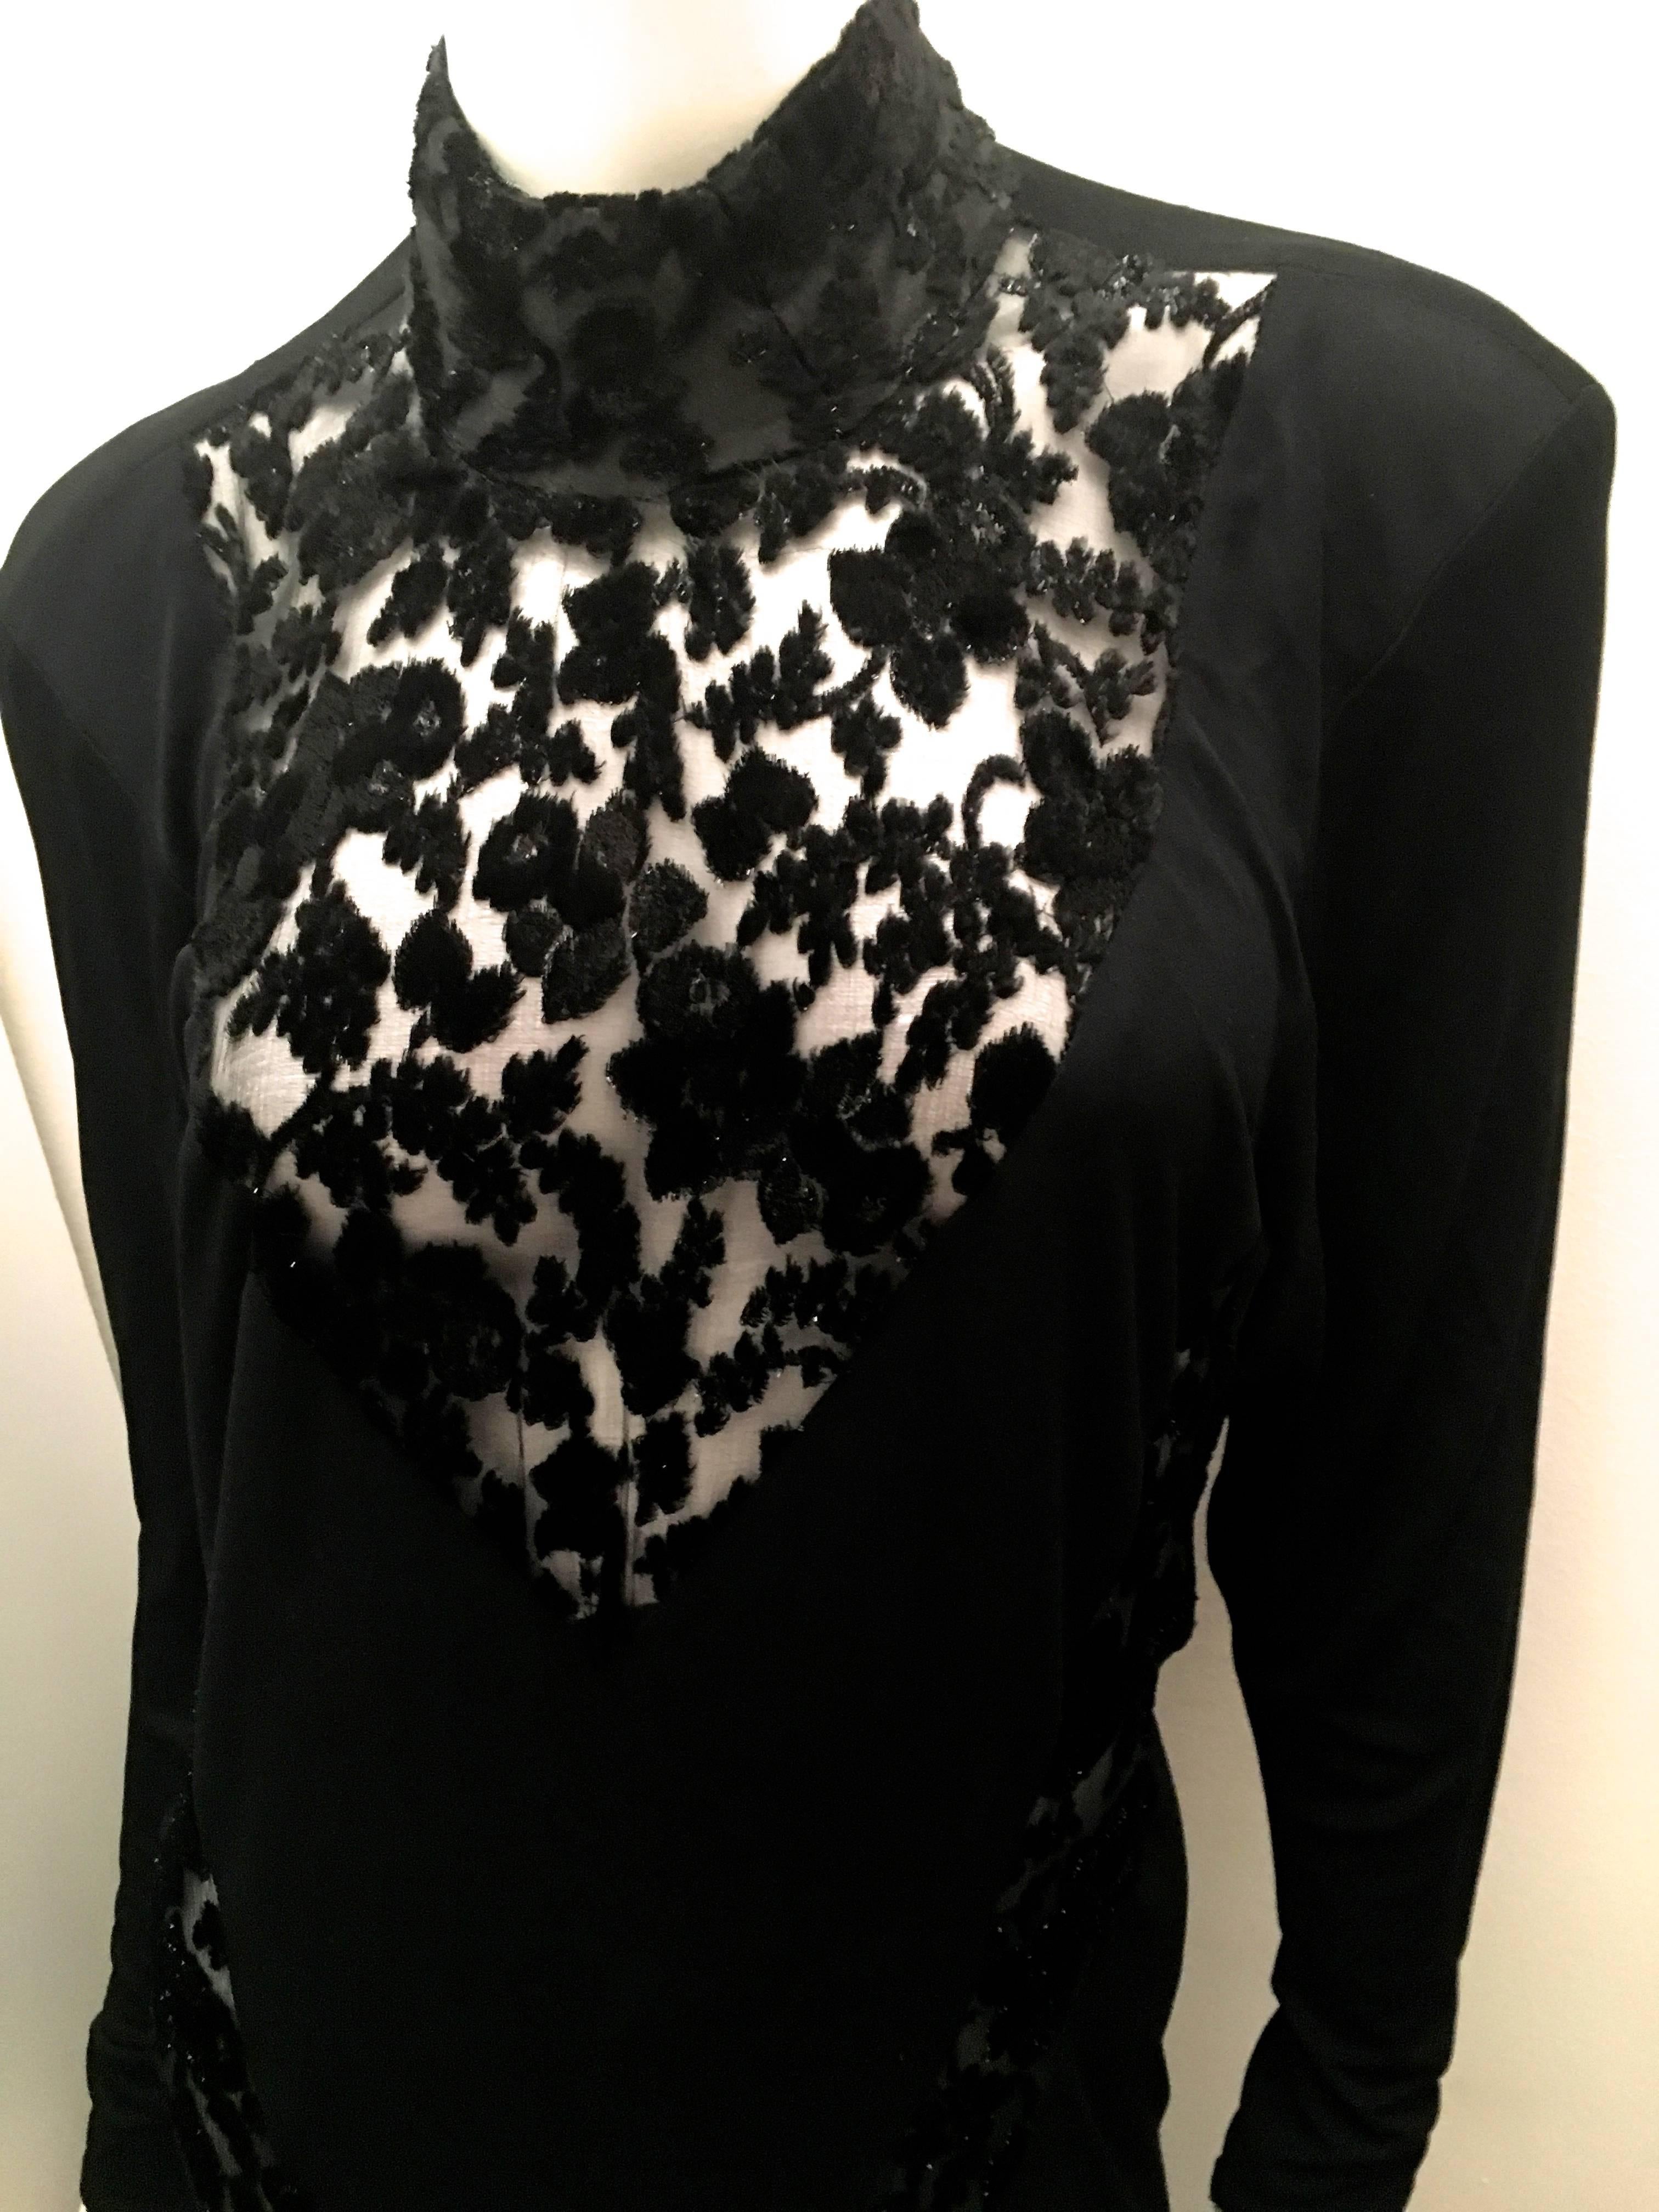 Presented here is an extremely rare Ossie Clark gown from the 1970’s. The beautiful garment consists of a black jersey with translucent mesh highlighting beautiful floral designs. The evening gown has a v-neck of center mesh and on the sides has